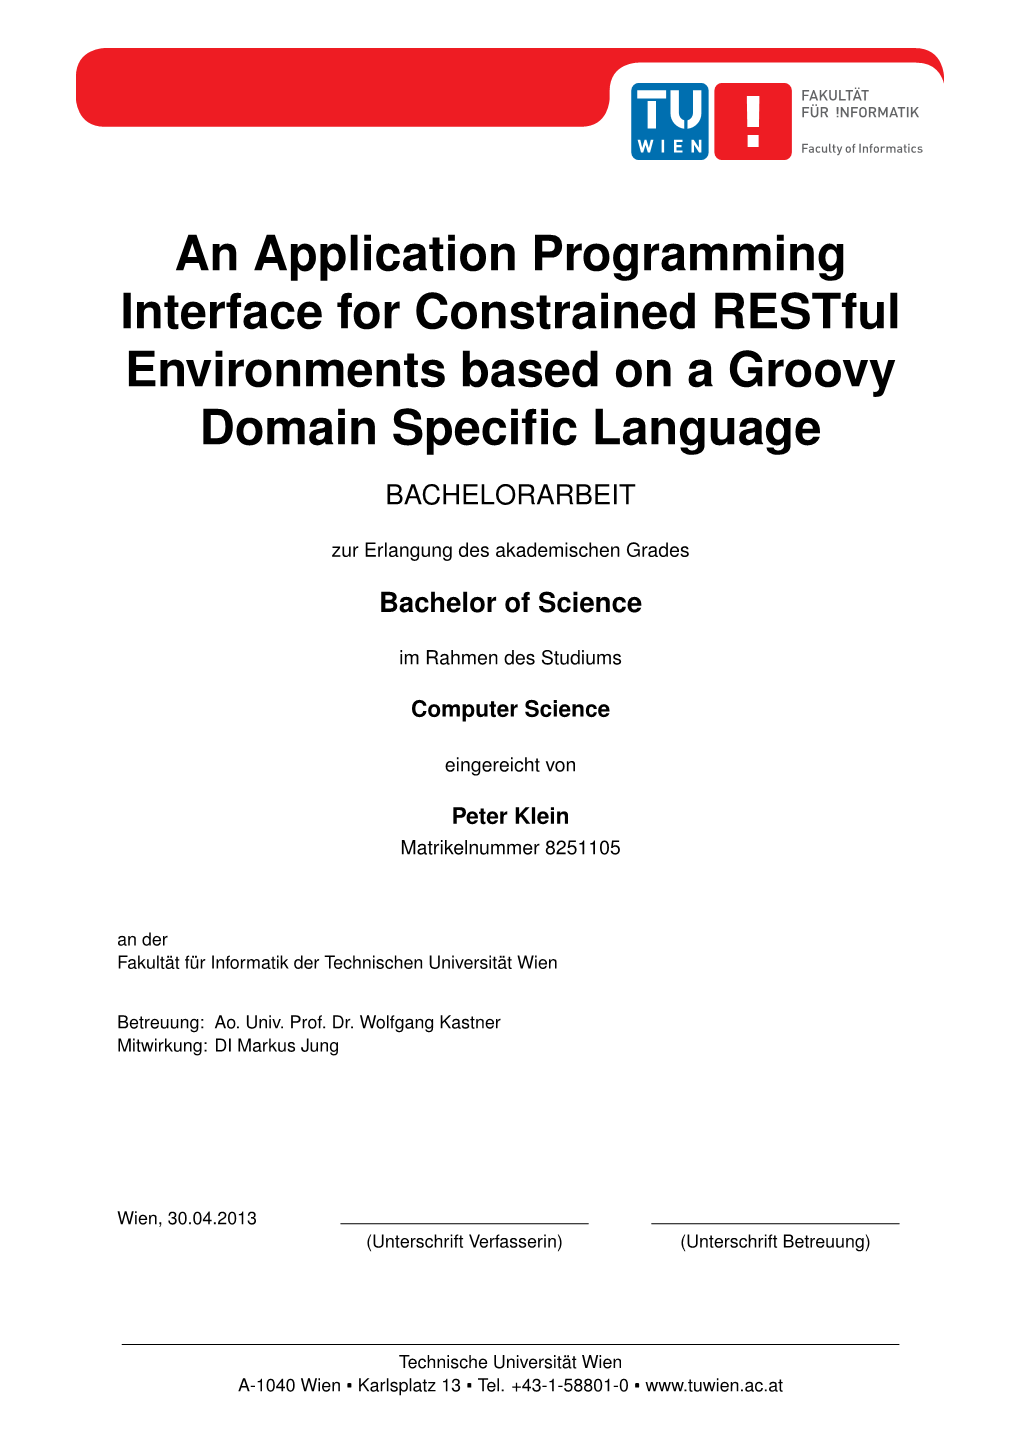 An Application Programming Interface for Constrained Restful Environments Based on a Groovy Domain Speciﬁc Language